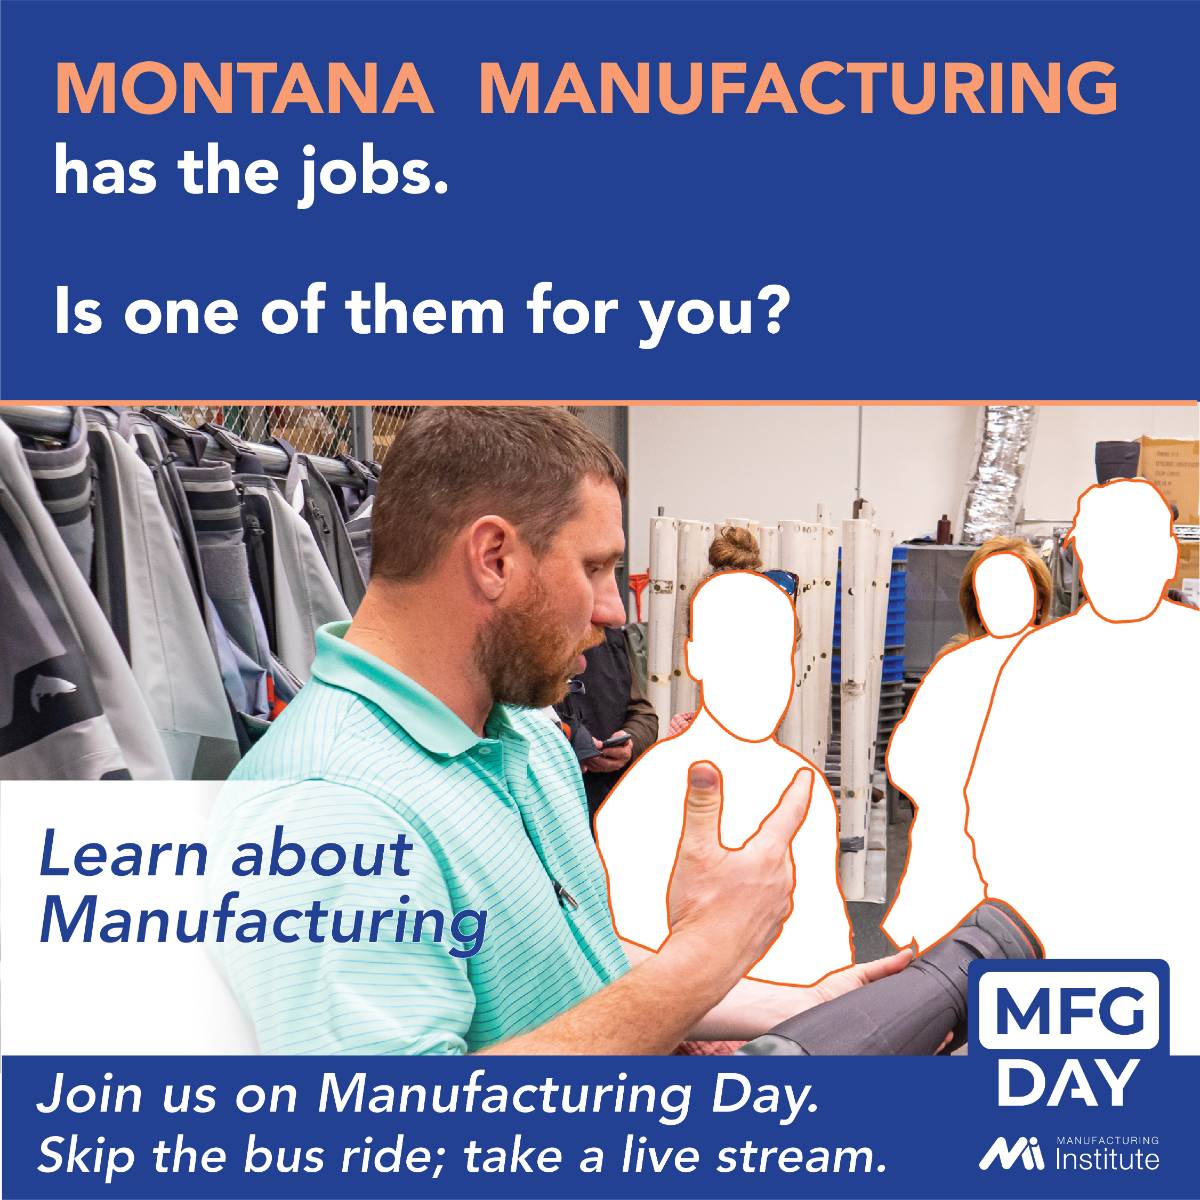 Montana manufacturing has the jobs. Is one of them for you? Learn about manufacturing.